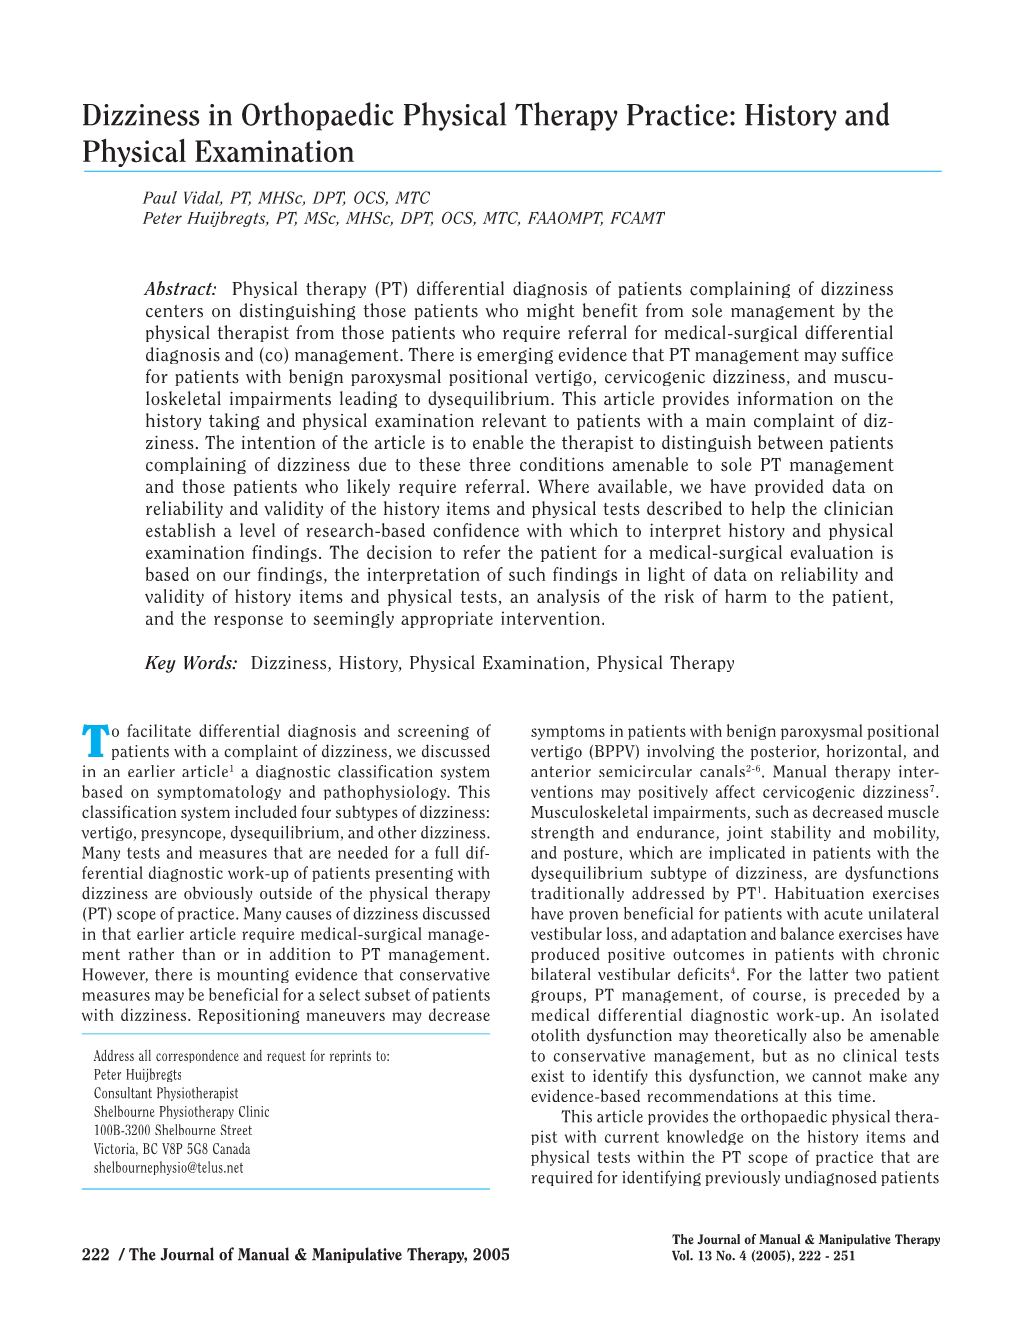 Dizziness in Orthopaedic Physical Therapy Practice: History and Physical Examination